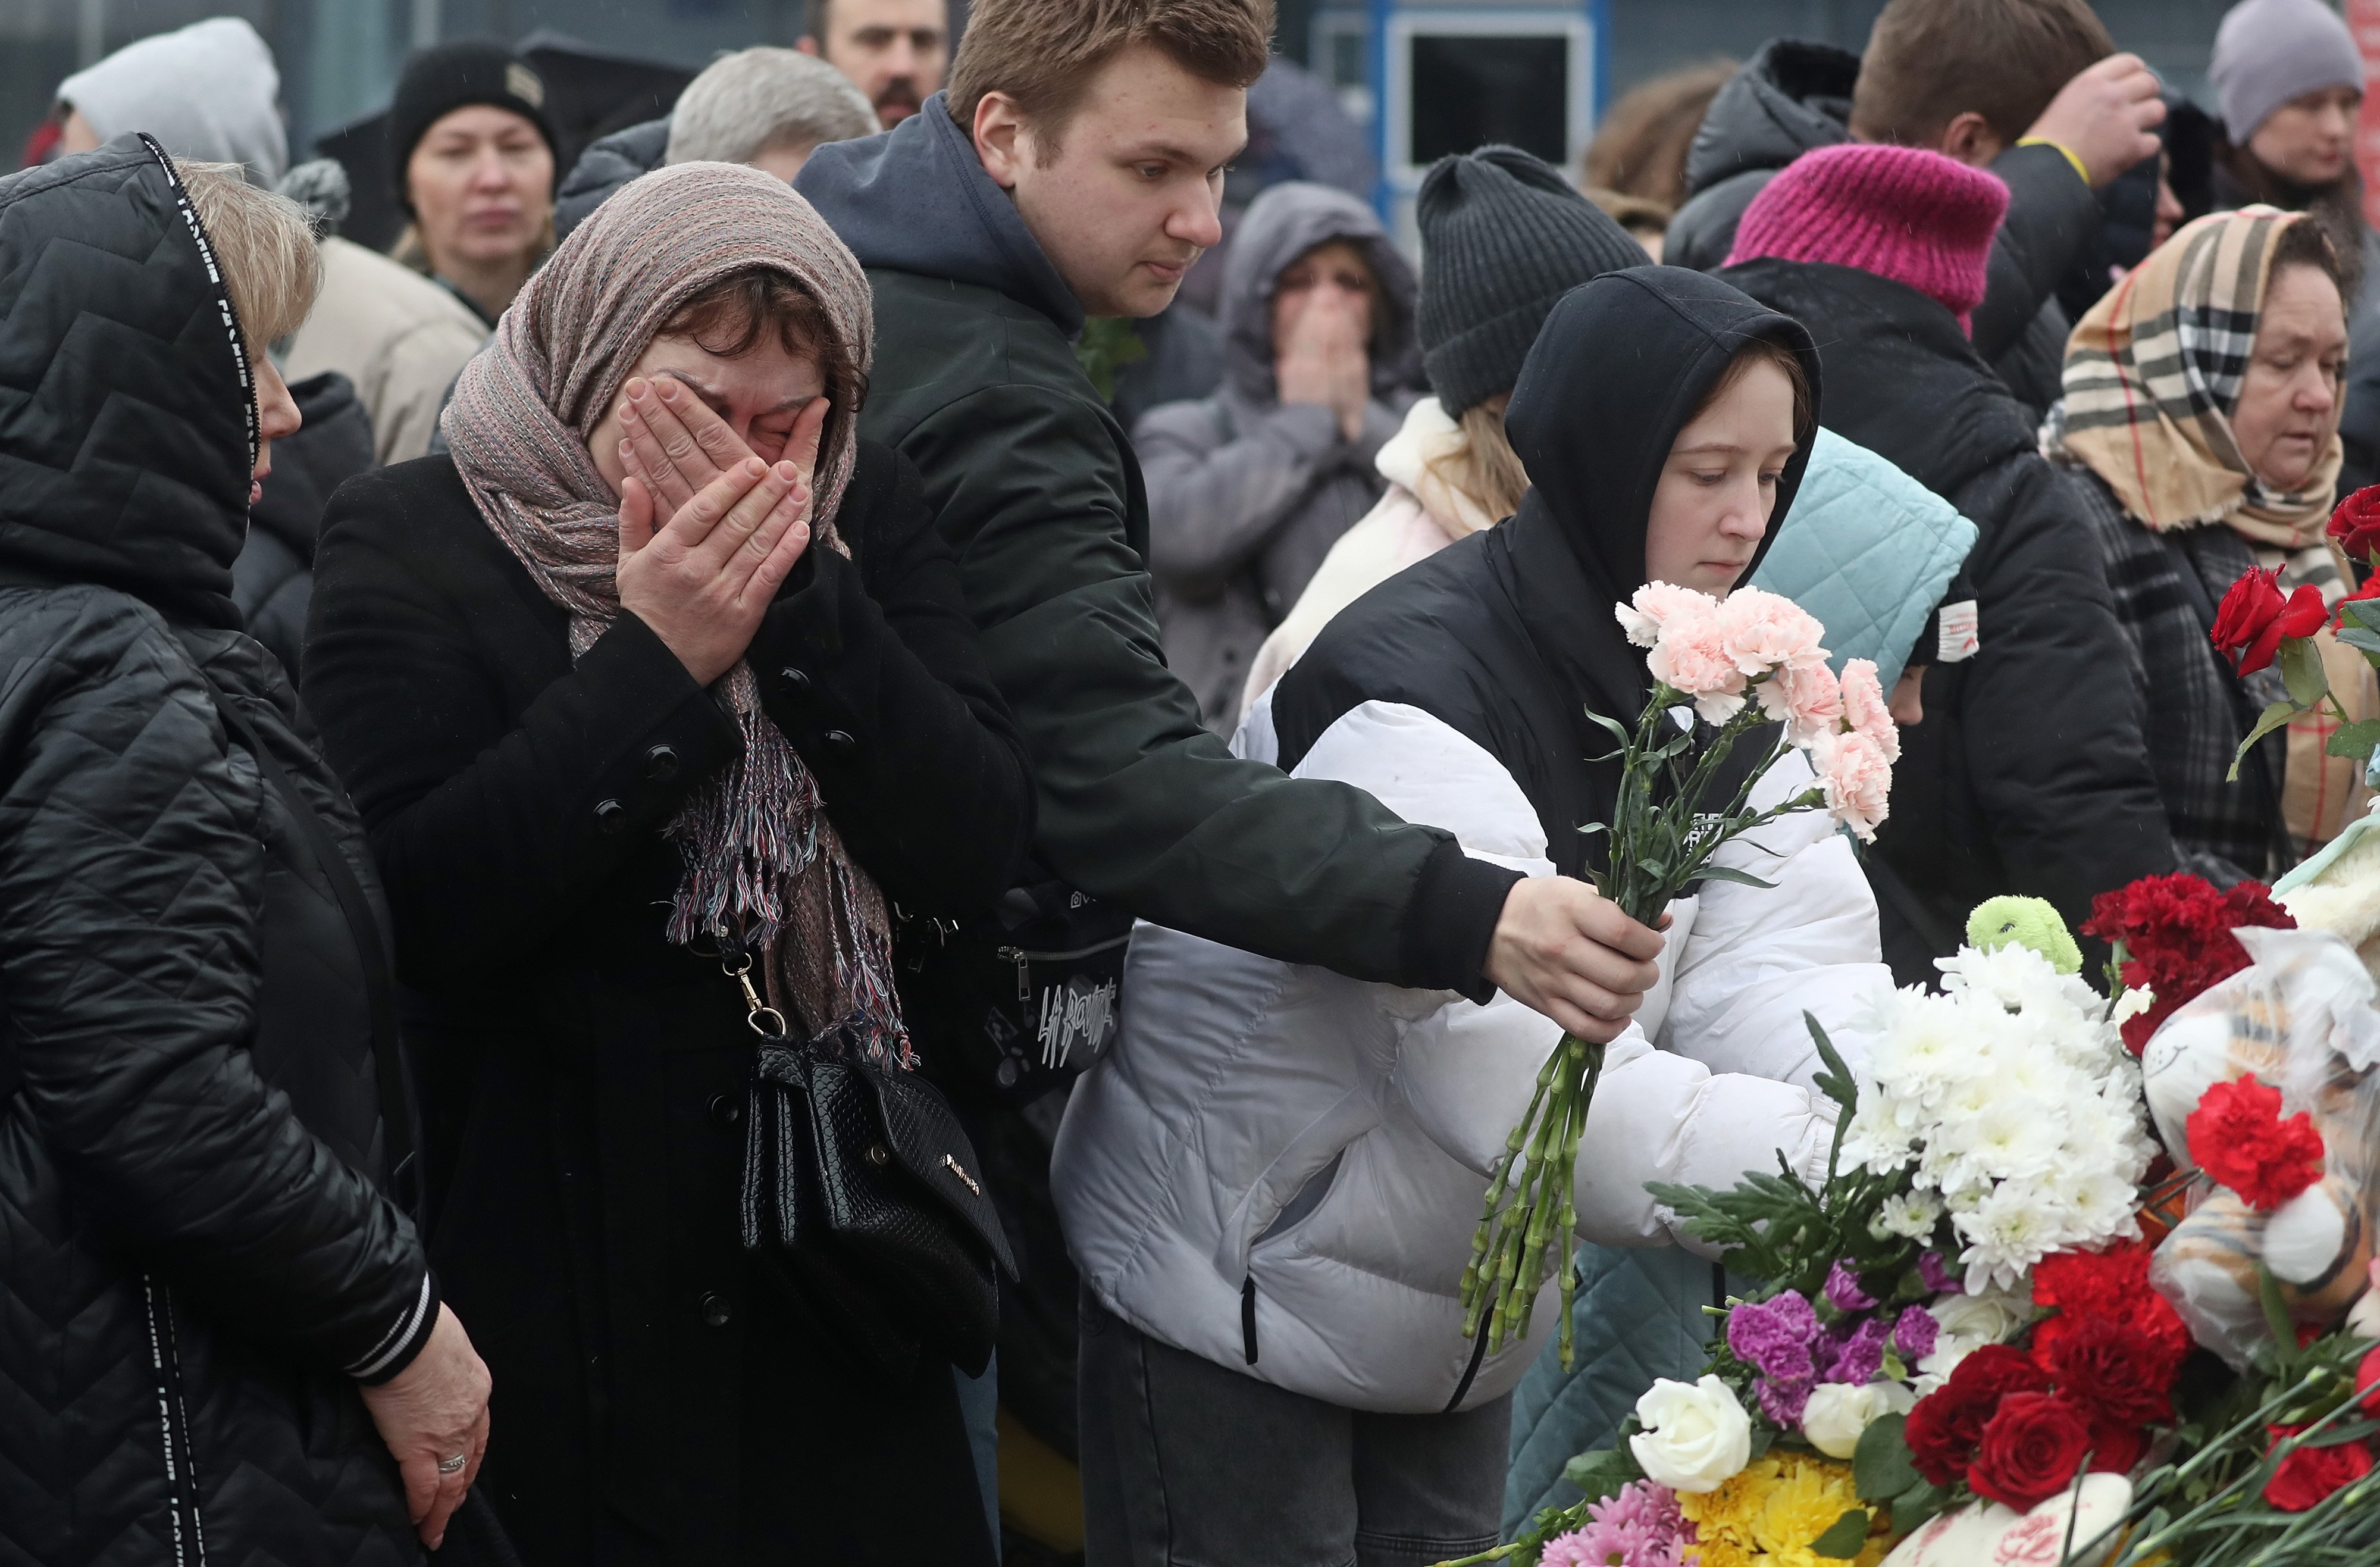 People mourn and bring flowers at the Crocus City Hall concert venue following a terrorist attack. Photo: EPA-EFE